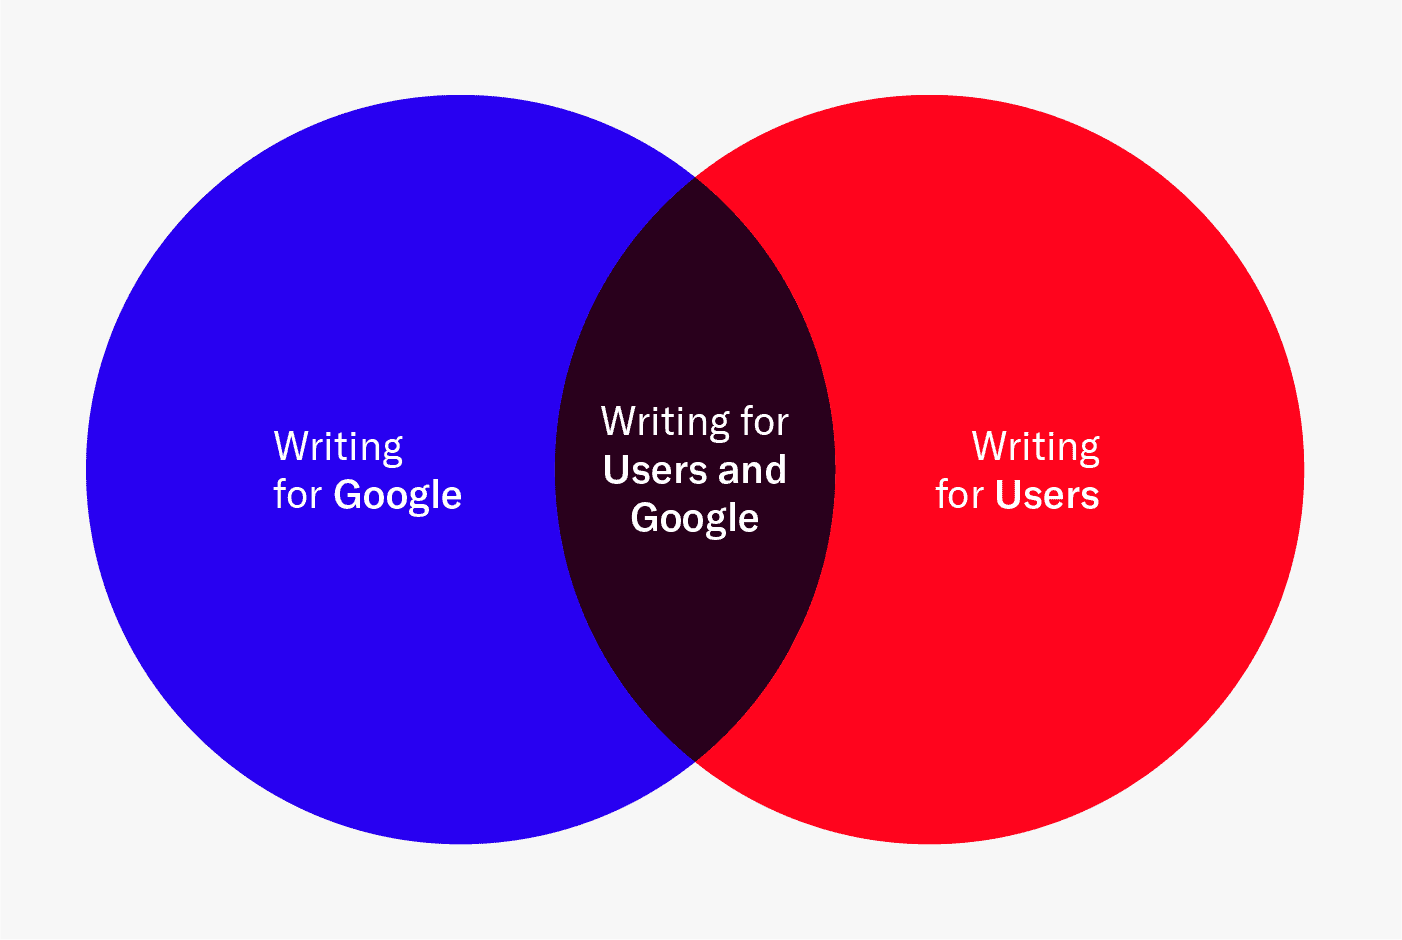 SEO friendly content is the intersection of writing for users and Google. 